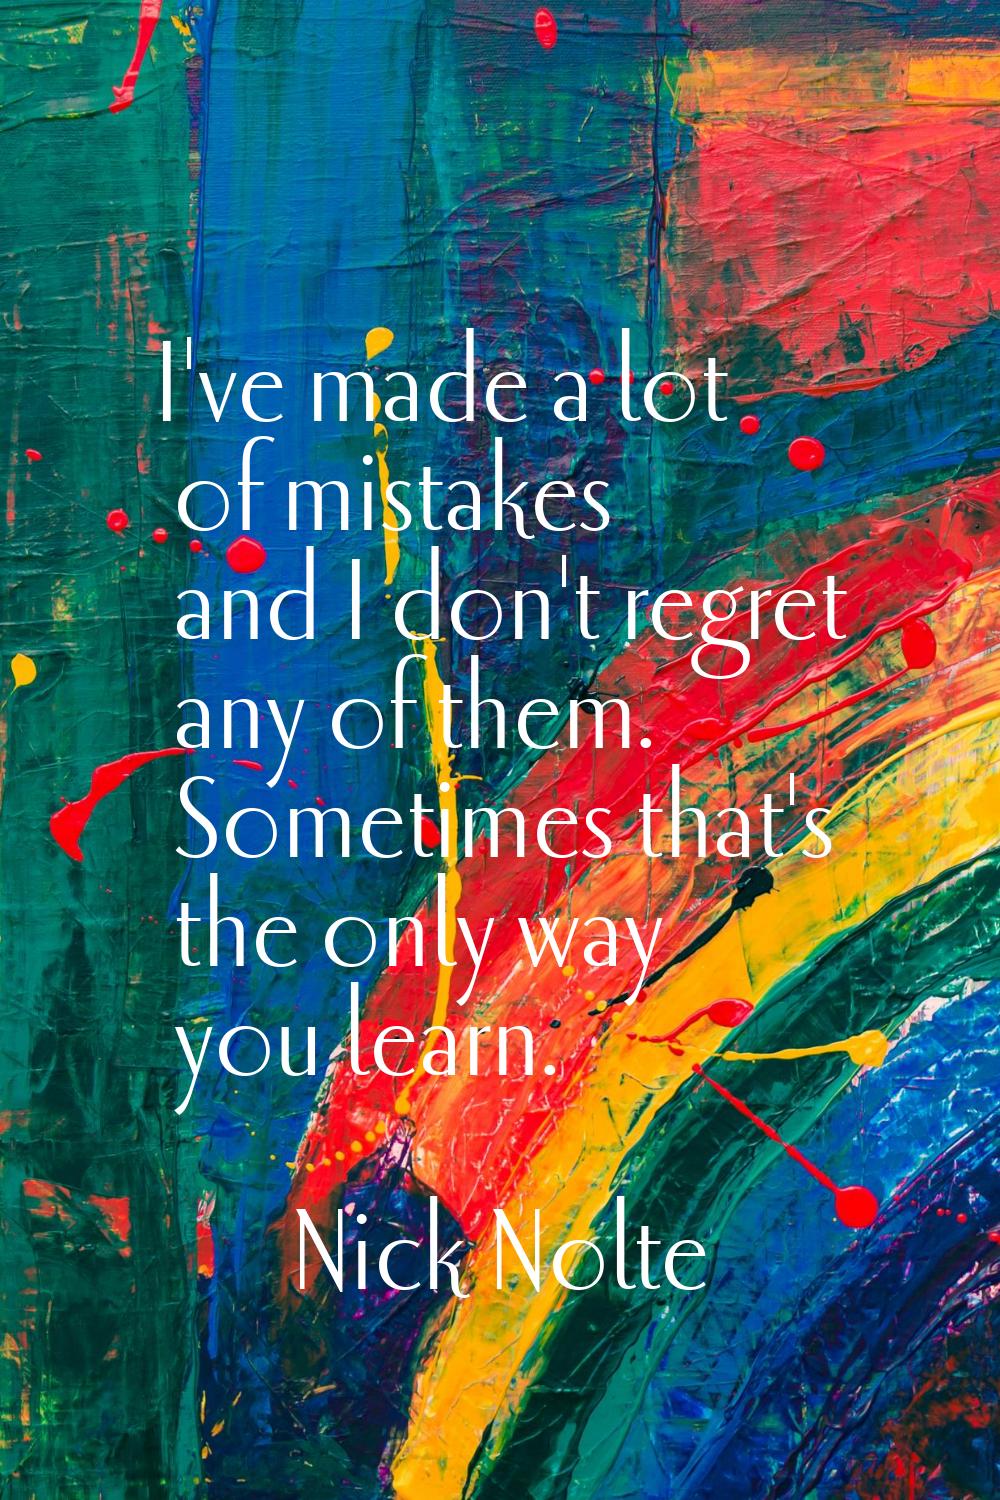 I've made a lot of mistakes and I don't regret any of them. Sometimes that's the only way you learn